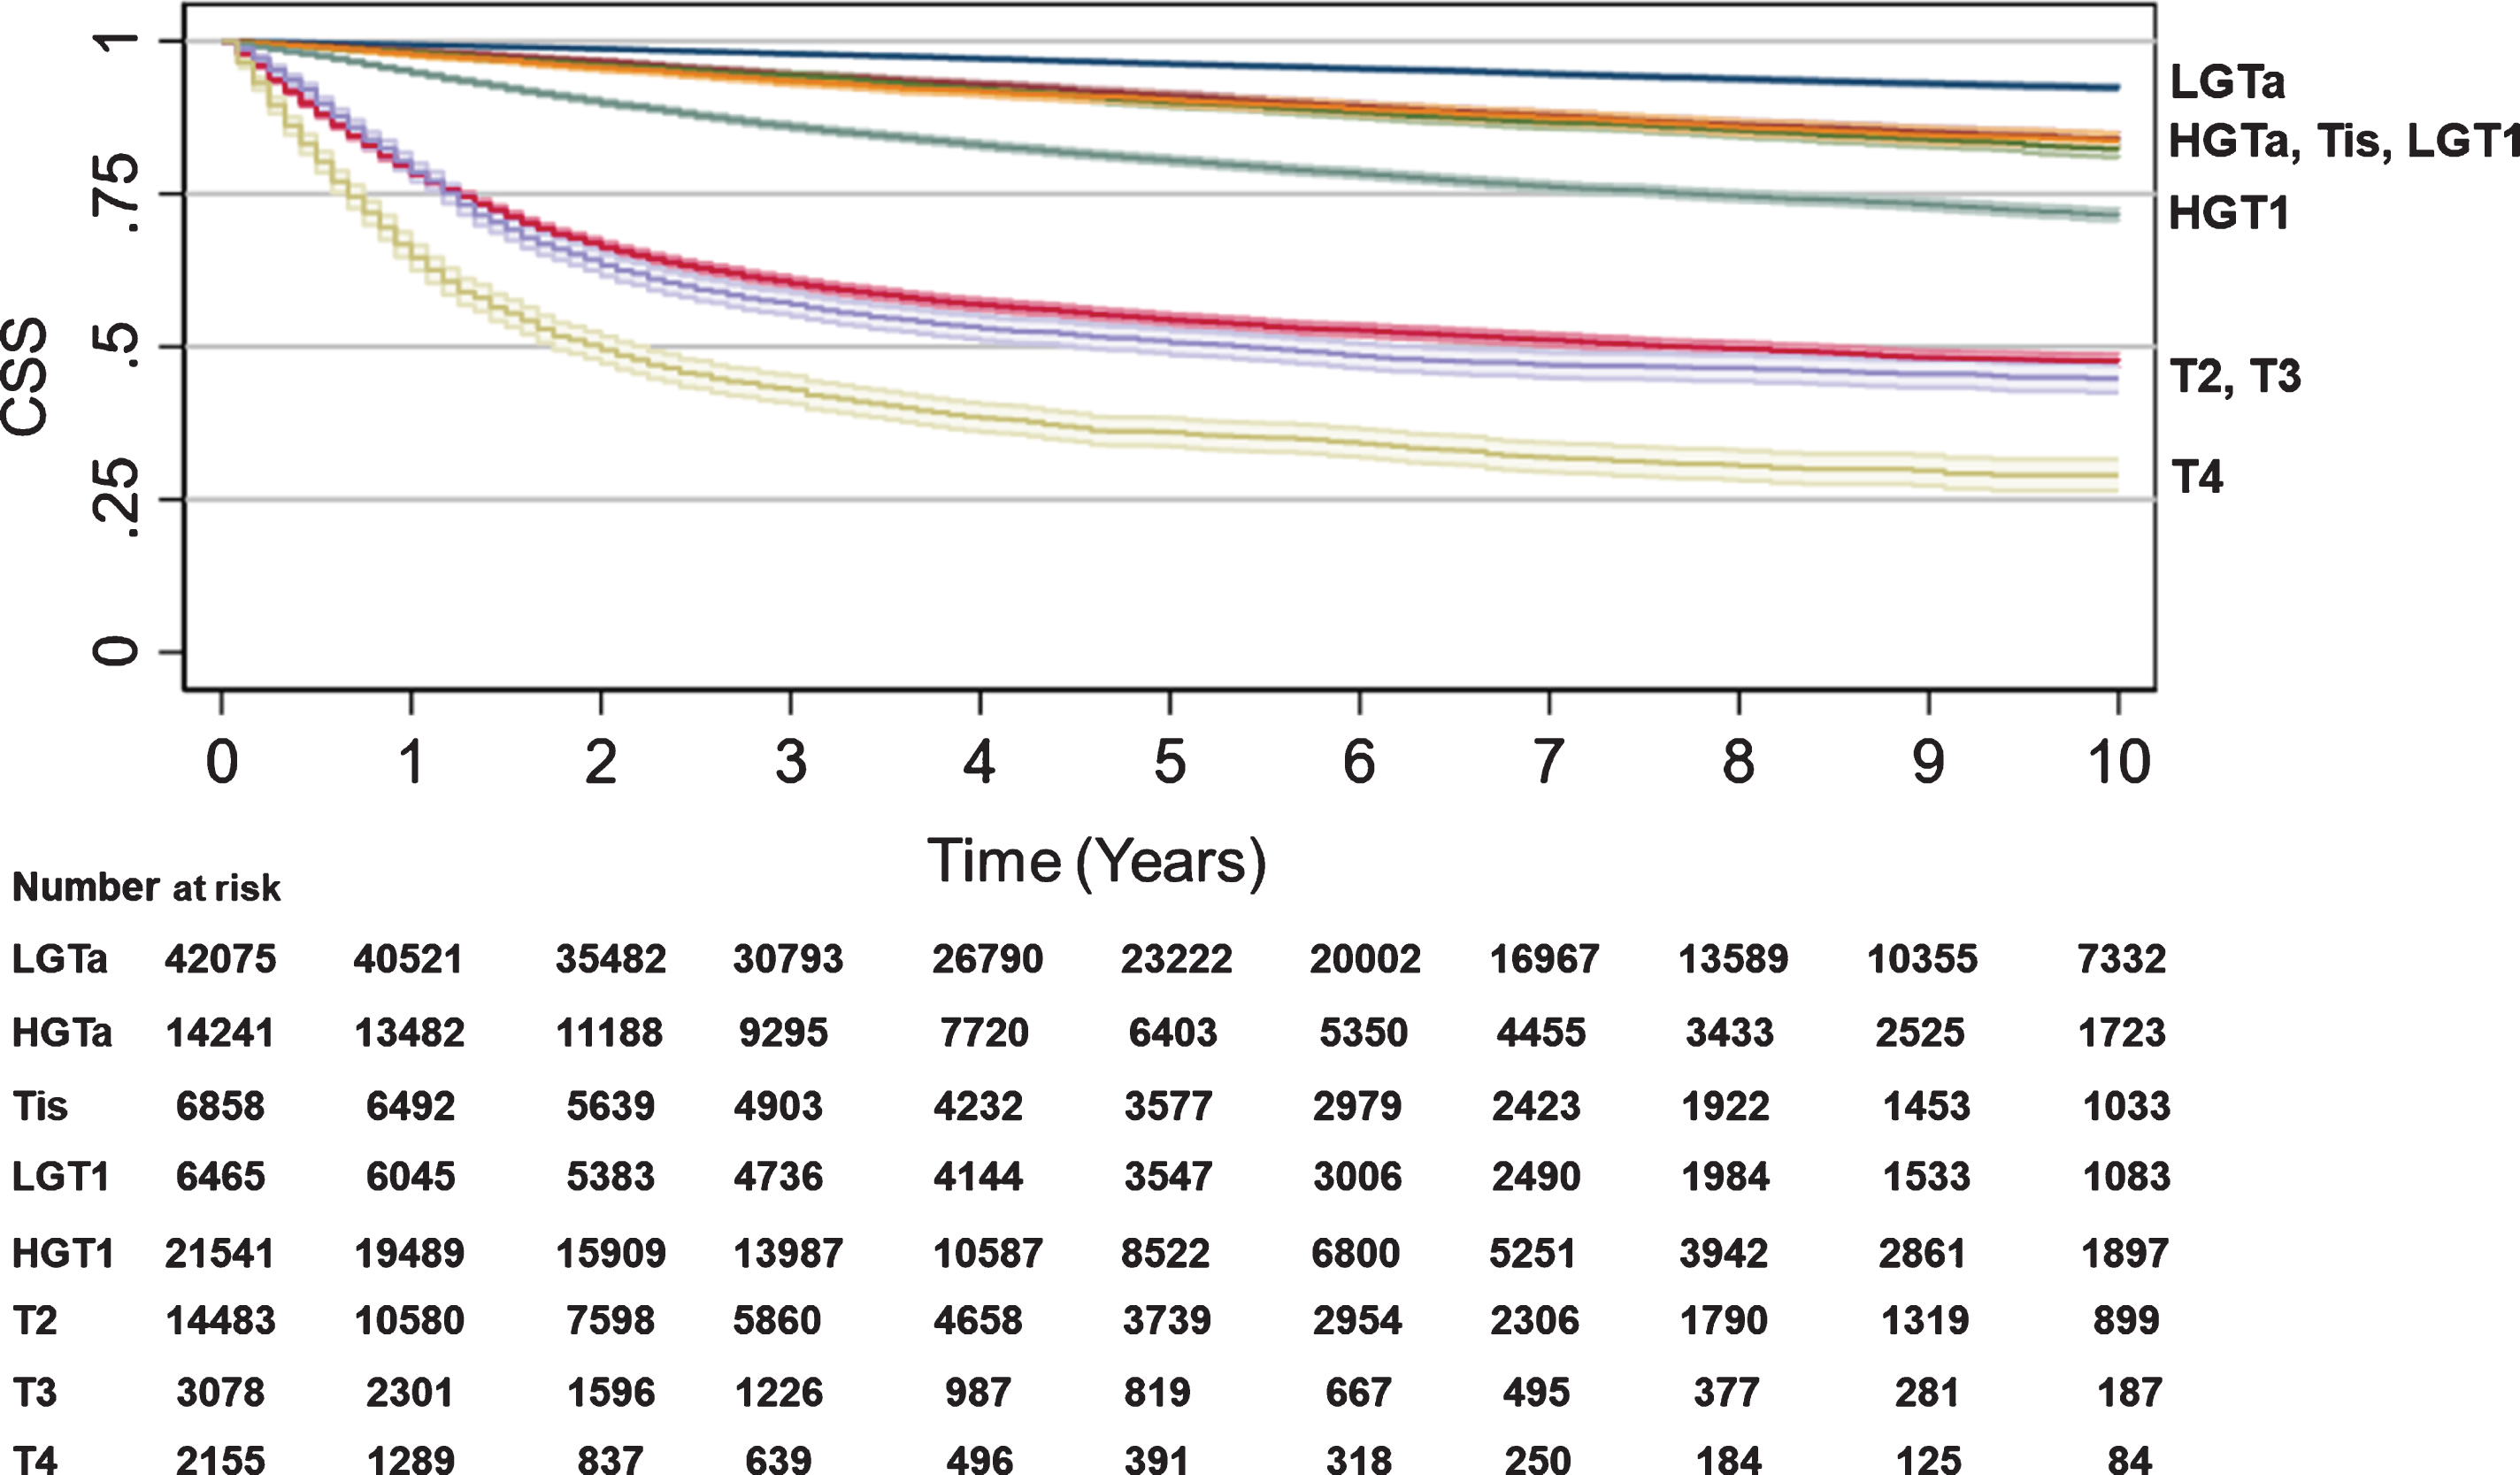 Cancer-specific survival by T stage. Kaplan-Meier analyses were performed to estimate CSS from time of diagnosis to censorings or death using SEER data with LGTa as a reference. Blue (LGTa), maroon (HGTa), green (Tis), orange (LGT1), teal (HGT1), red (T2), purple (T3), yellow (T4). Shading represents 95% CI. For SEER, OS hazard ratios, 95% CI, and p values when compared to LGTa were HGTa (1.94, CI 1.81–2.08, p < 0.001), Tis (2.28, CI 2.09–2.47, p < 0.001), LGT1 (2.30, CI 2.11–2.51, p < 0.001), HGT1 (4.24, CI 4.01–4.47, p < 0.001), T2 (12.18, CI 11.57–12.82, p < 0.001), T3 (14.60, CI 13.63–15.64, p < 0.001), and T4 (22.76, CI 21.19–24.44, p < 0.001).